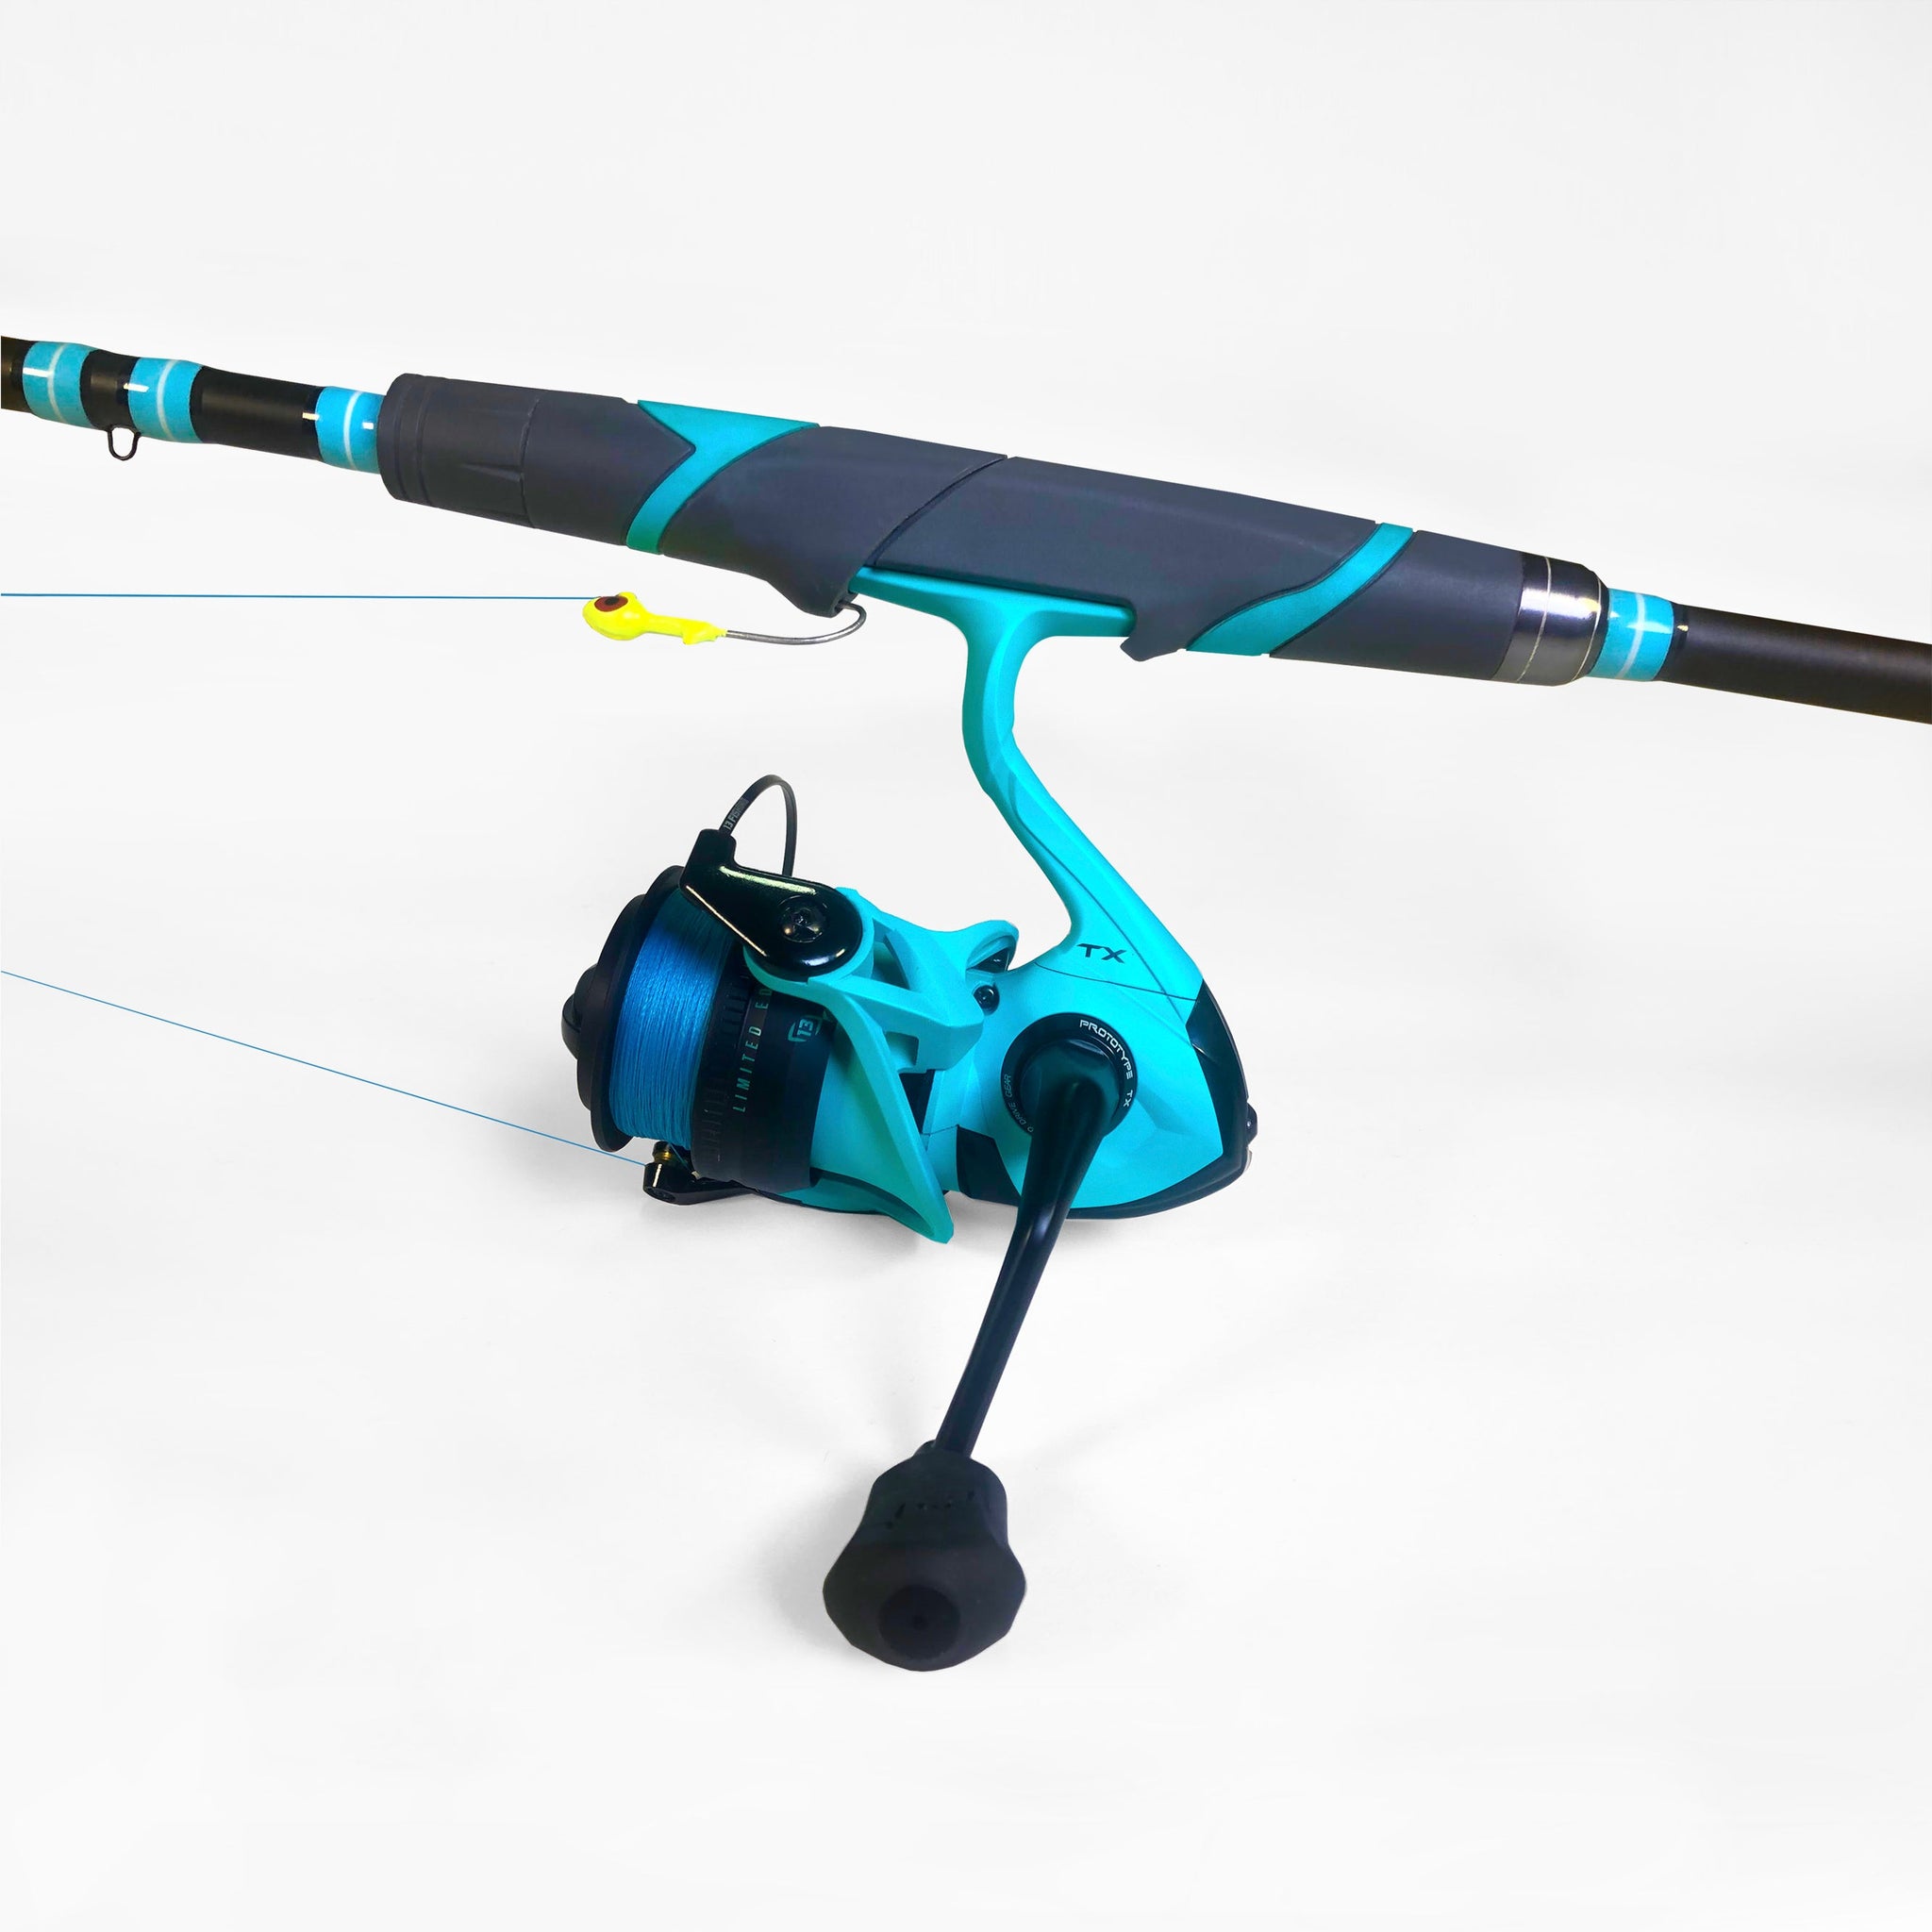 Salt Strong reviews the Toadfish Inshore rod.